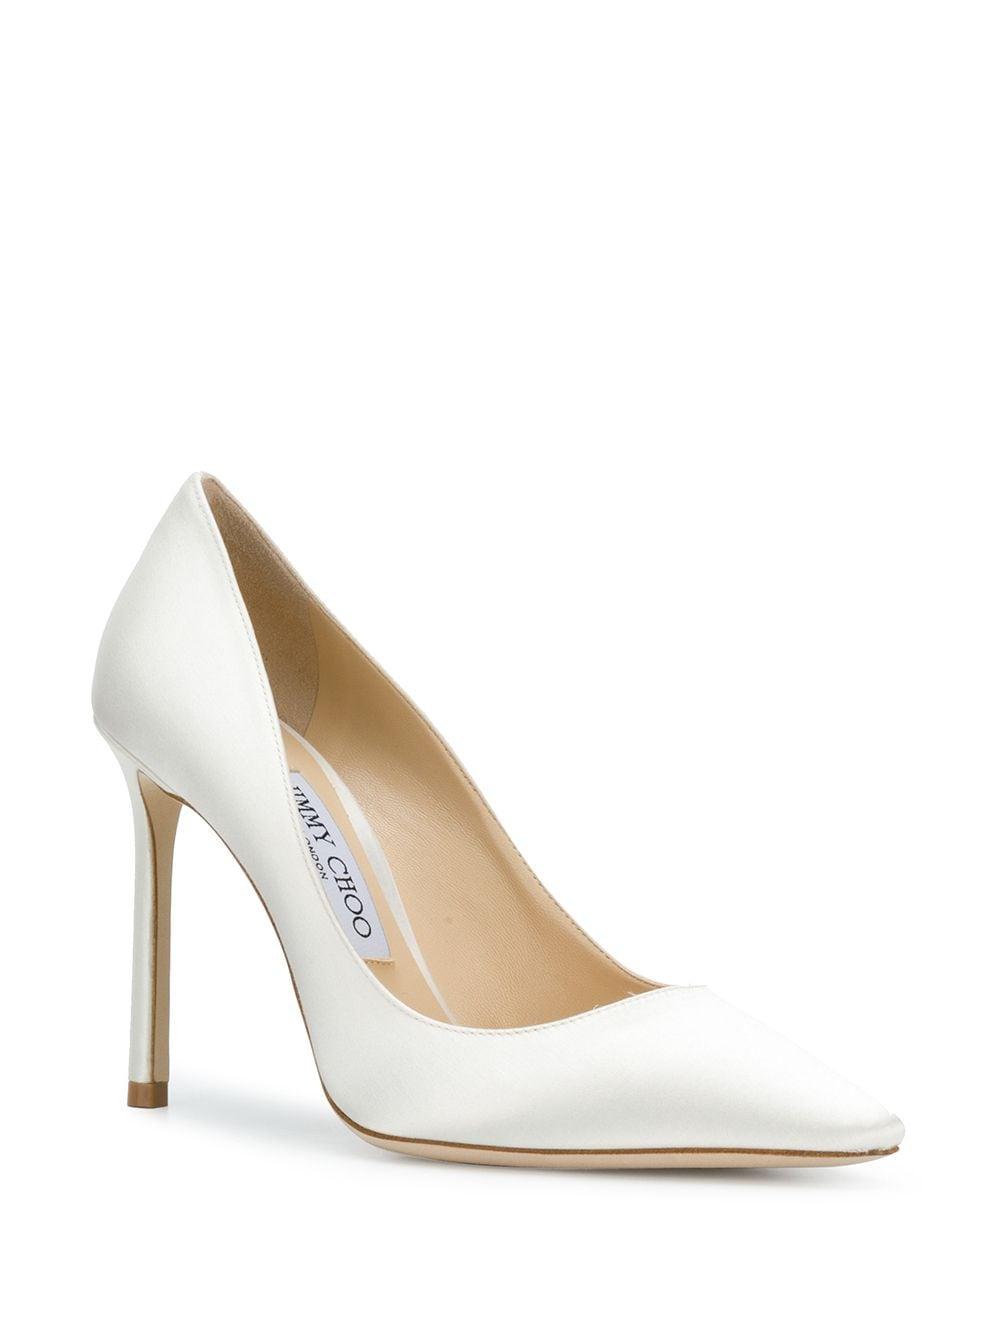 Jimmy Choo Leather Romy 100 Pumps in White - Save 54% - Lyst